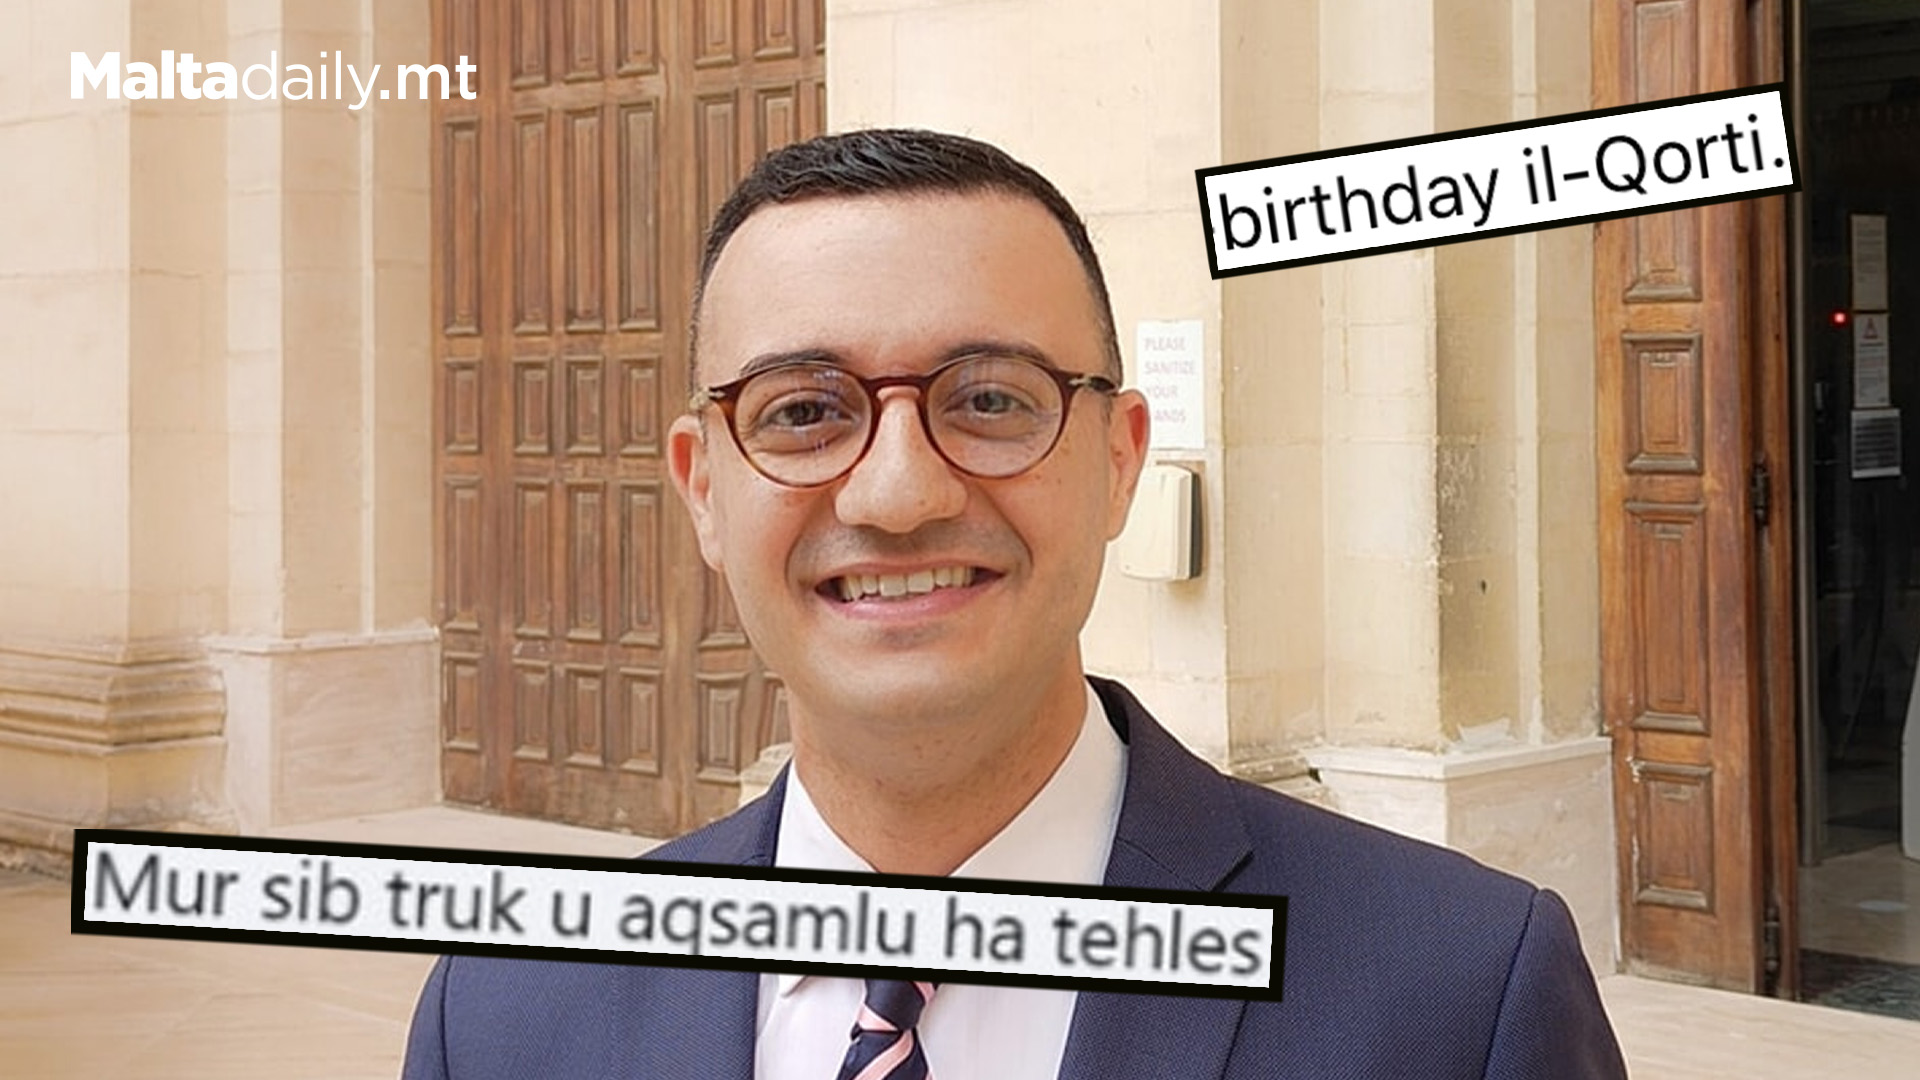 PN MP At Court On Birthday After Facebook Hate Speech